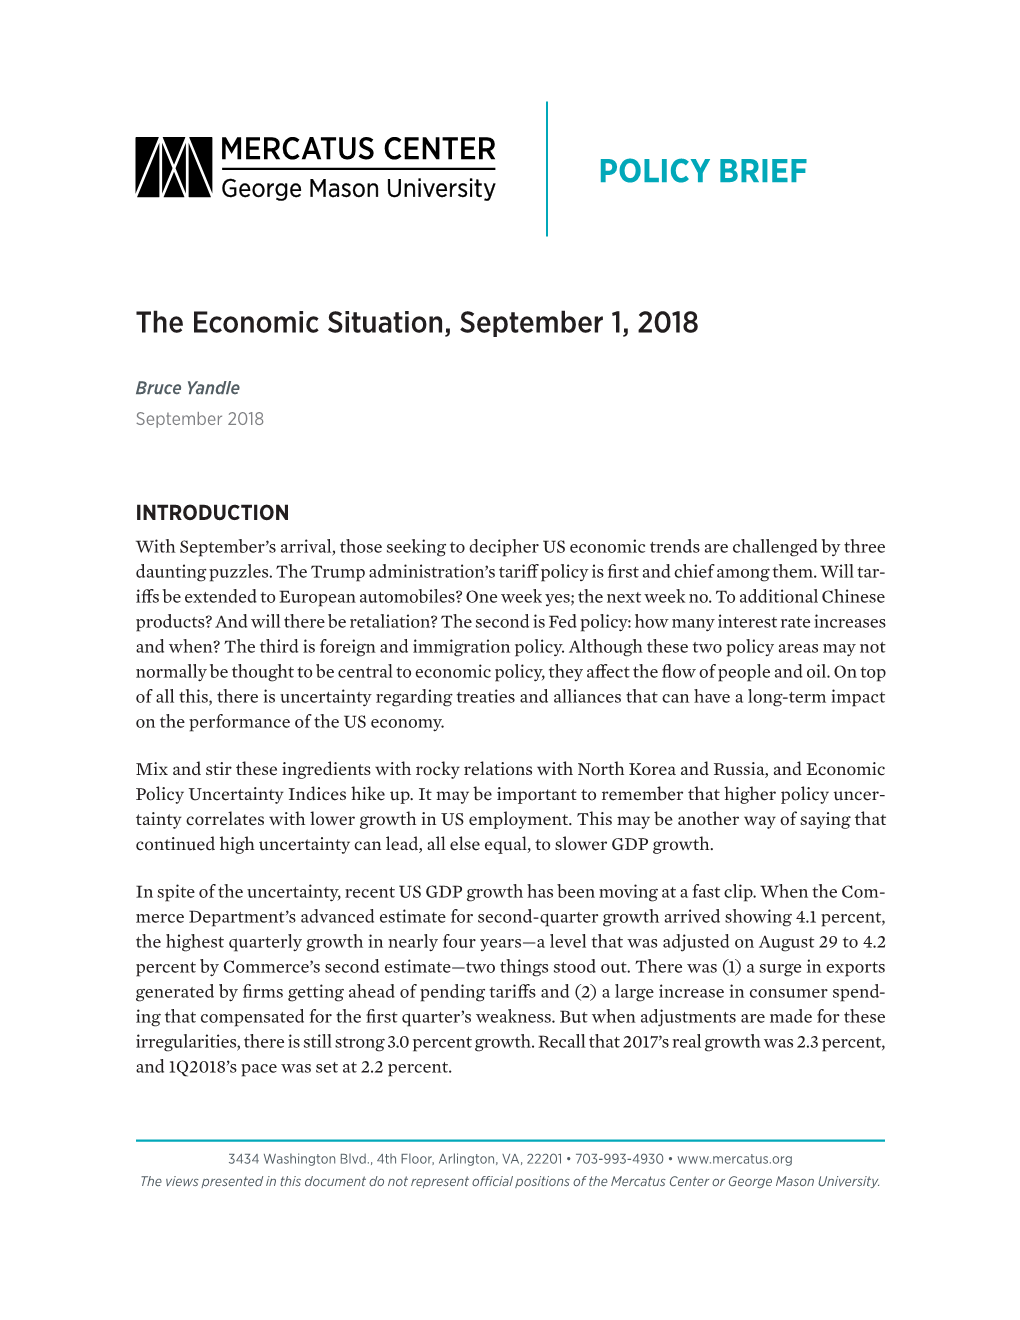 The Economic Situation, September 1, 2018